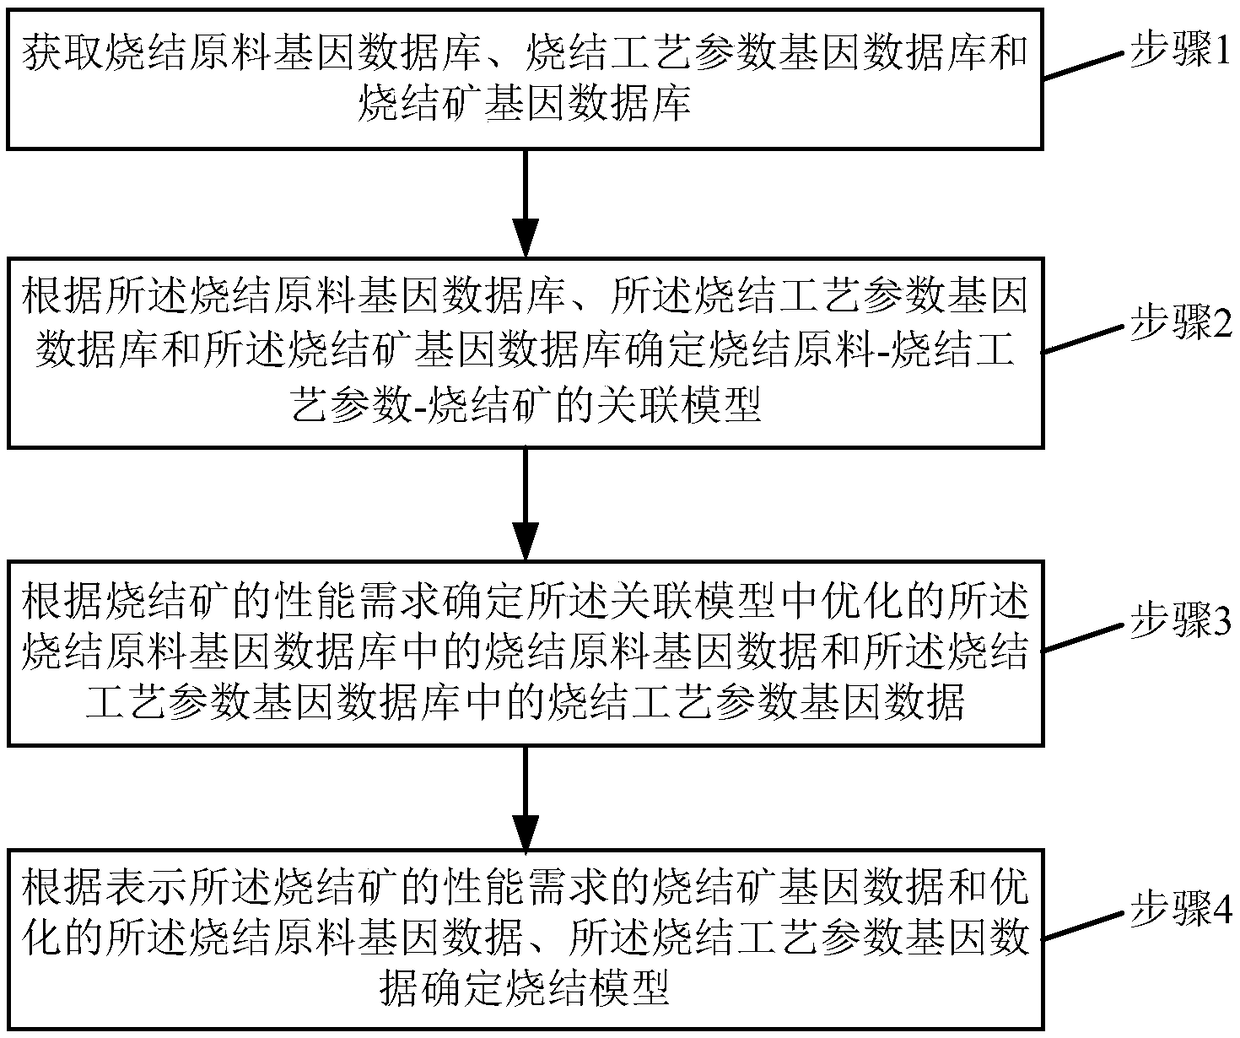 Sintered ore sintering model determination method and system based on material genes